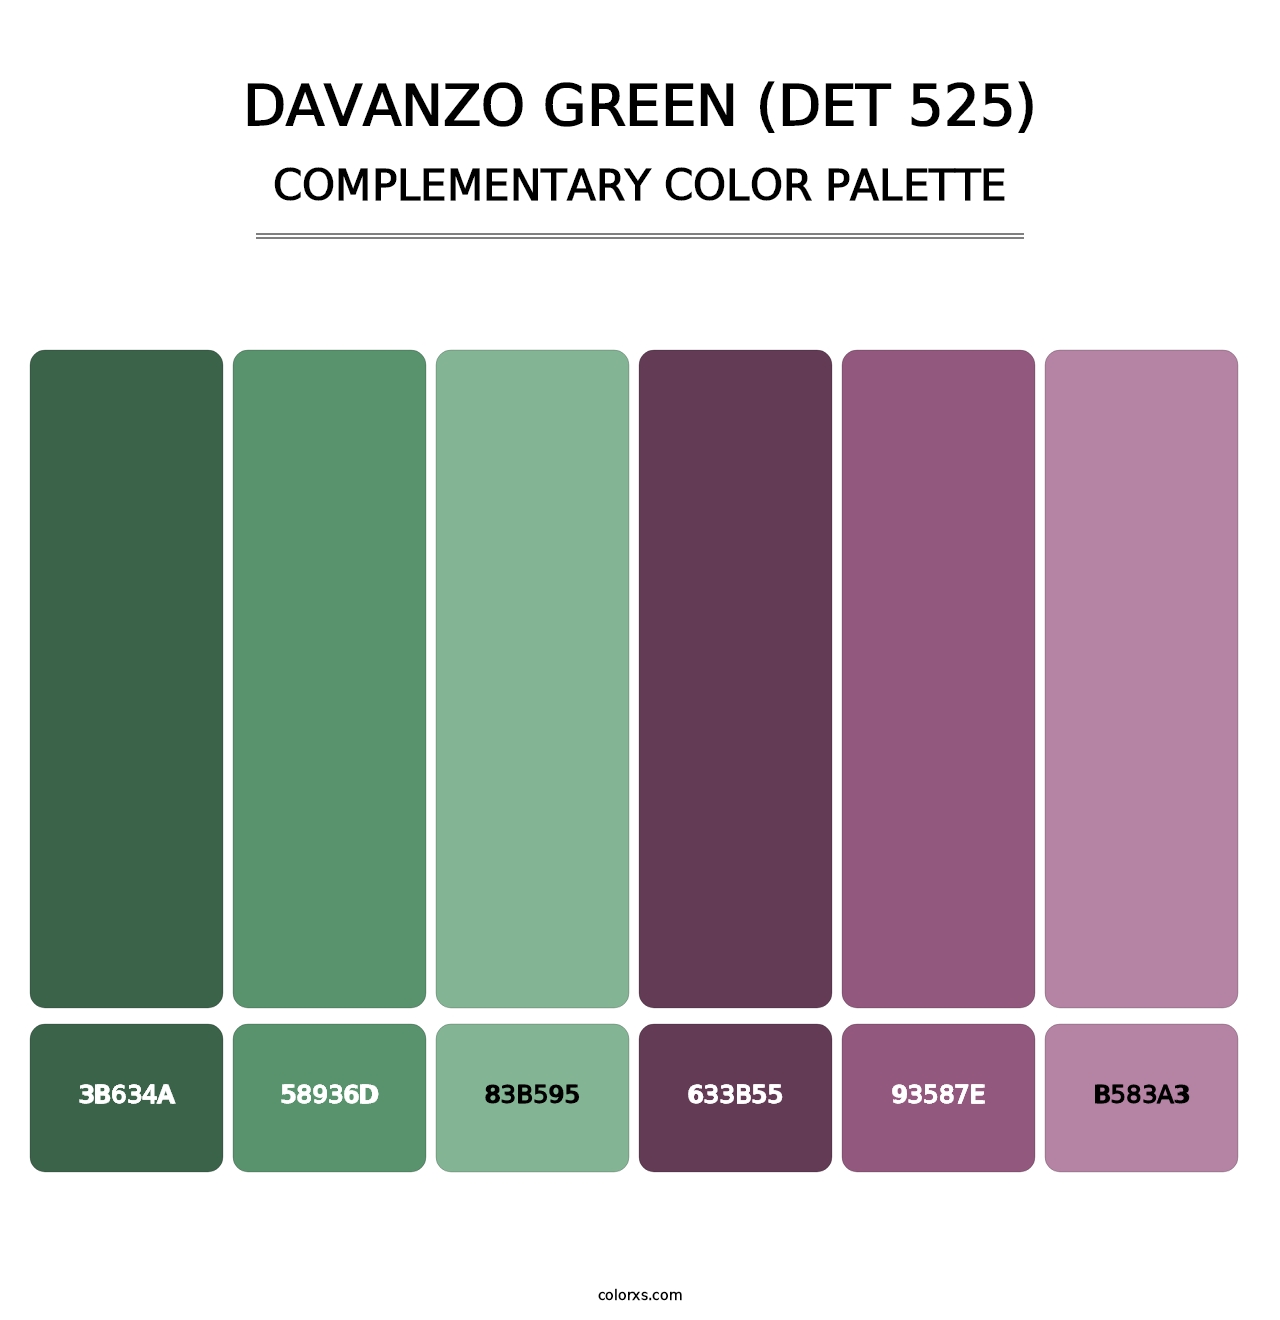 DaVanzo Green (DET 525) - Complementary Color Palette